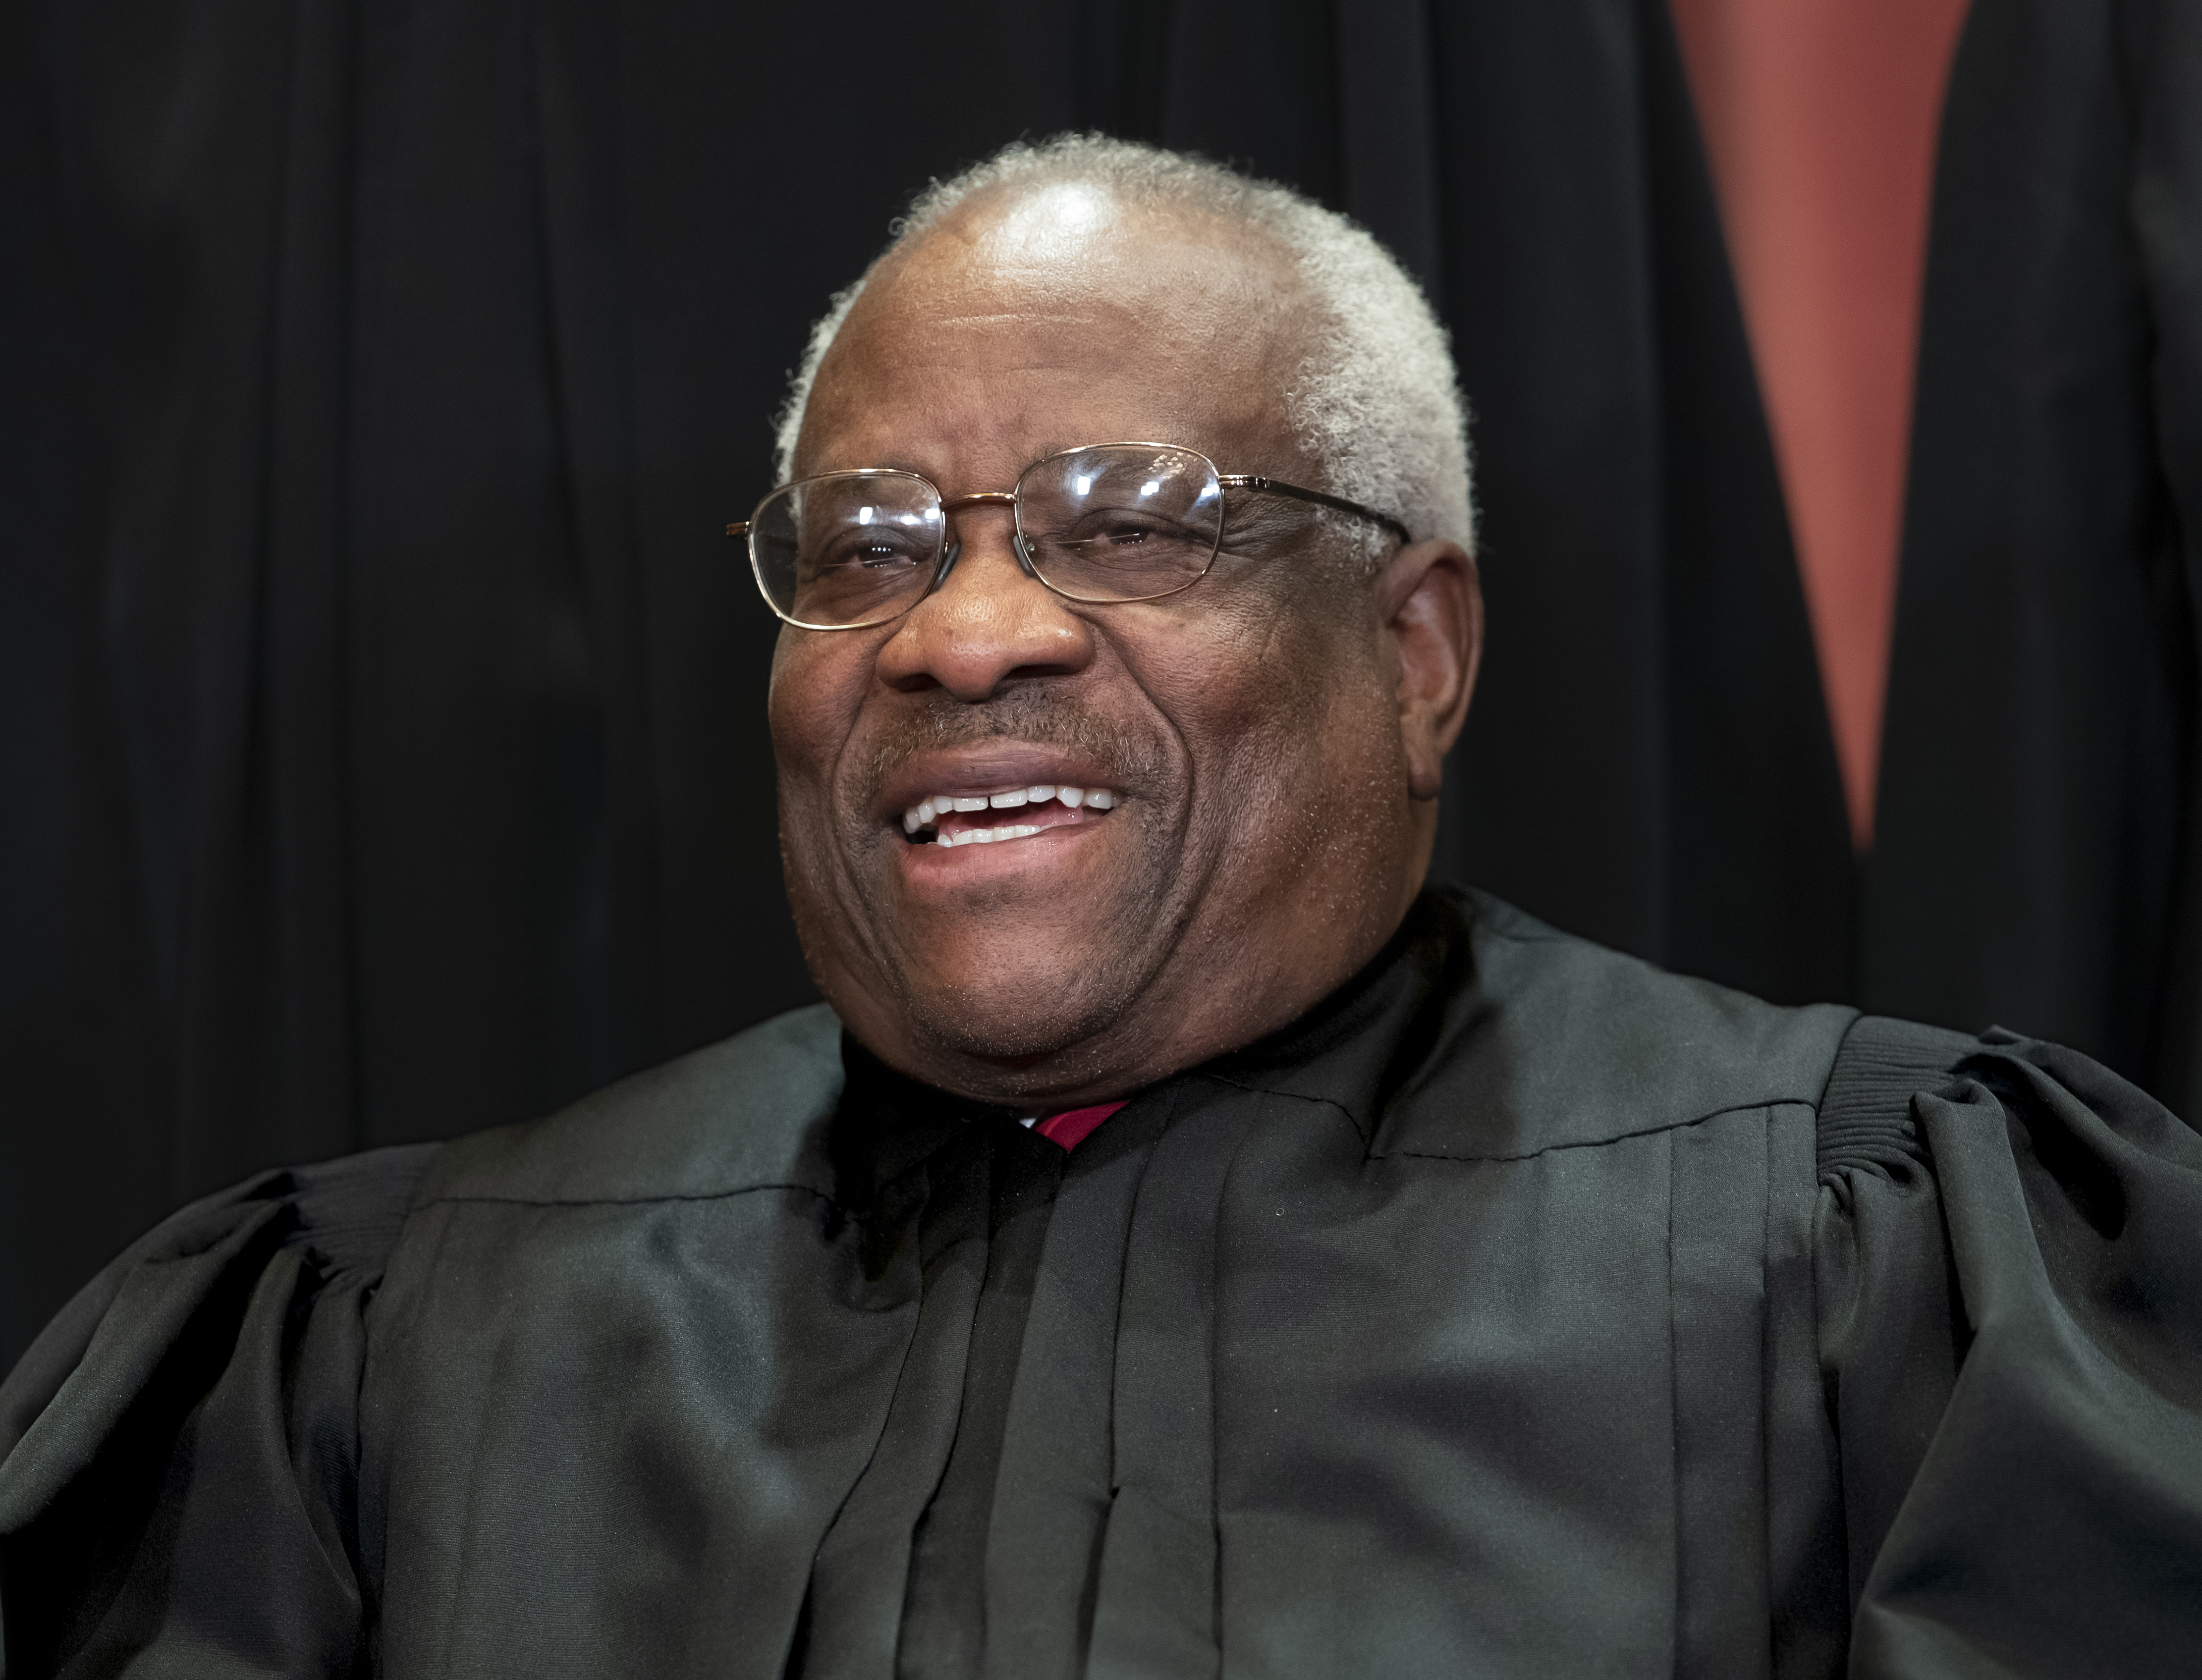 Justice Clarence Thomas spoke at a U.S. Supreme Court argument for the first time in three years.